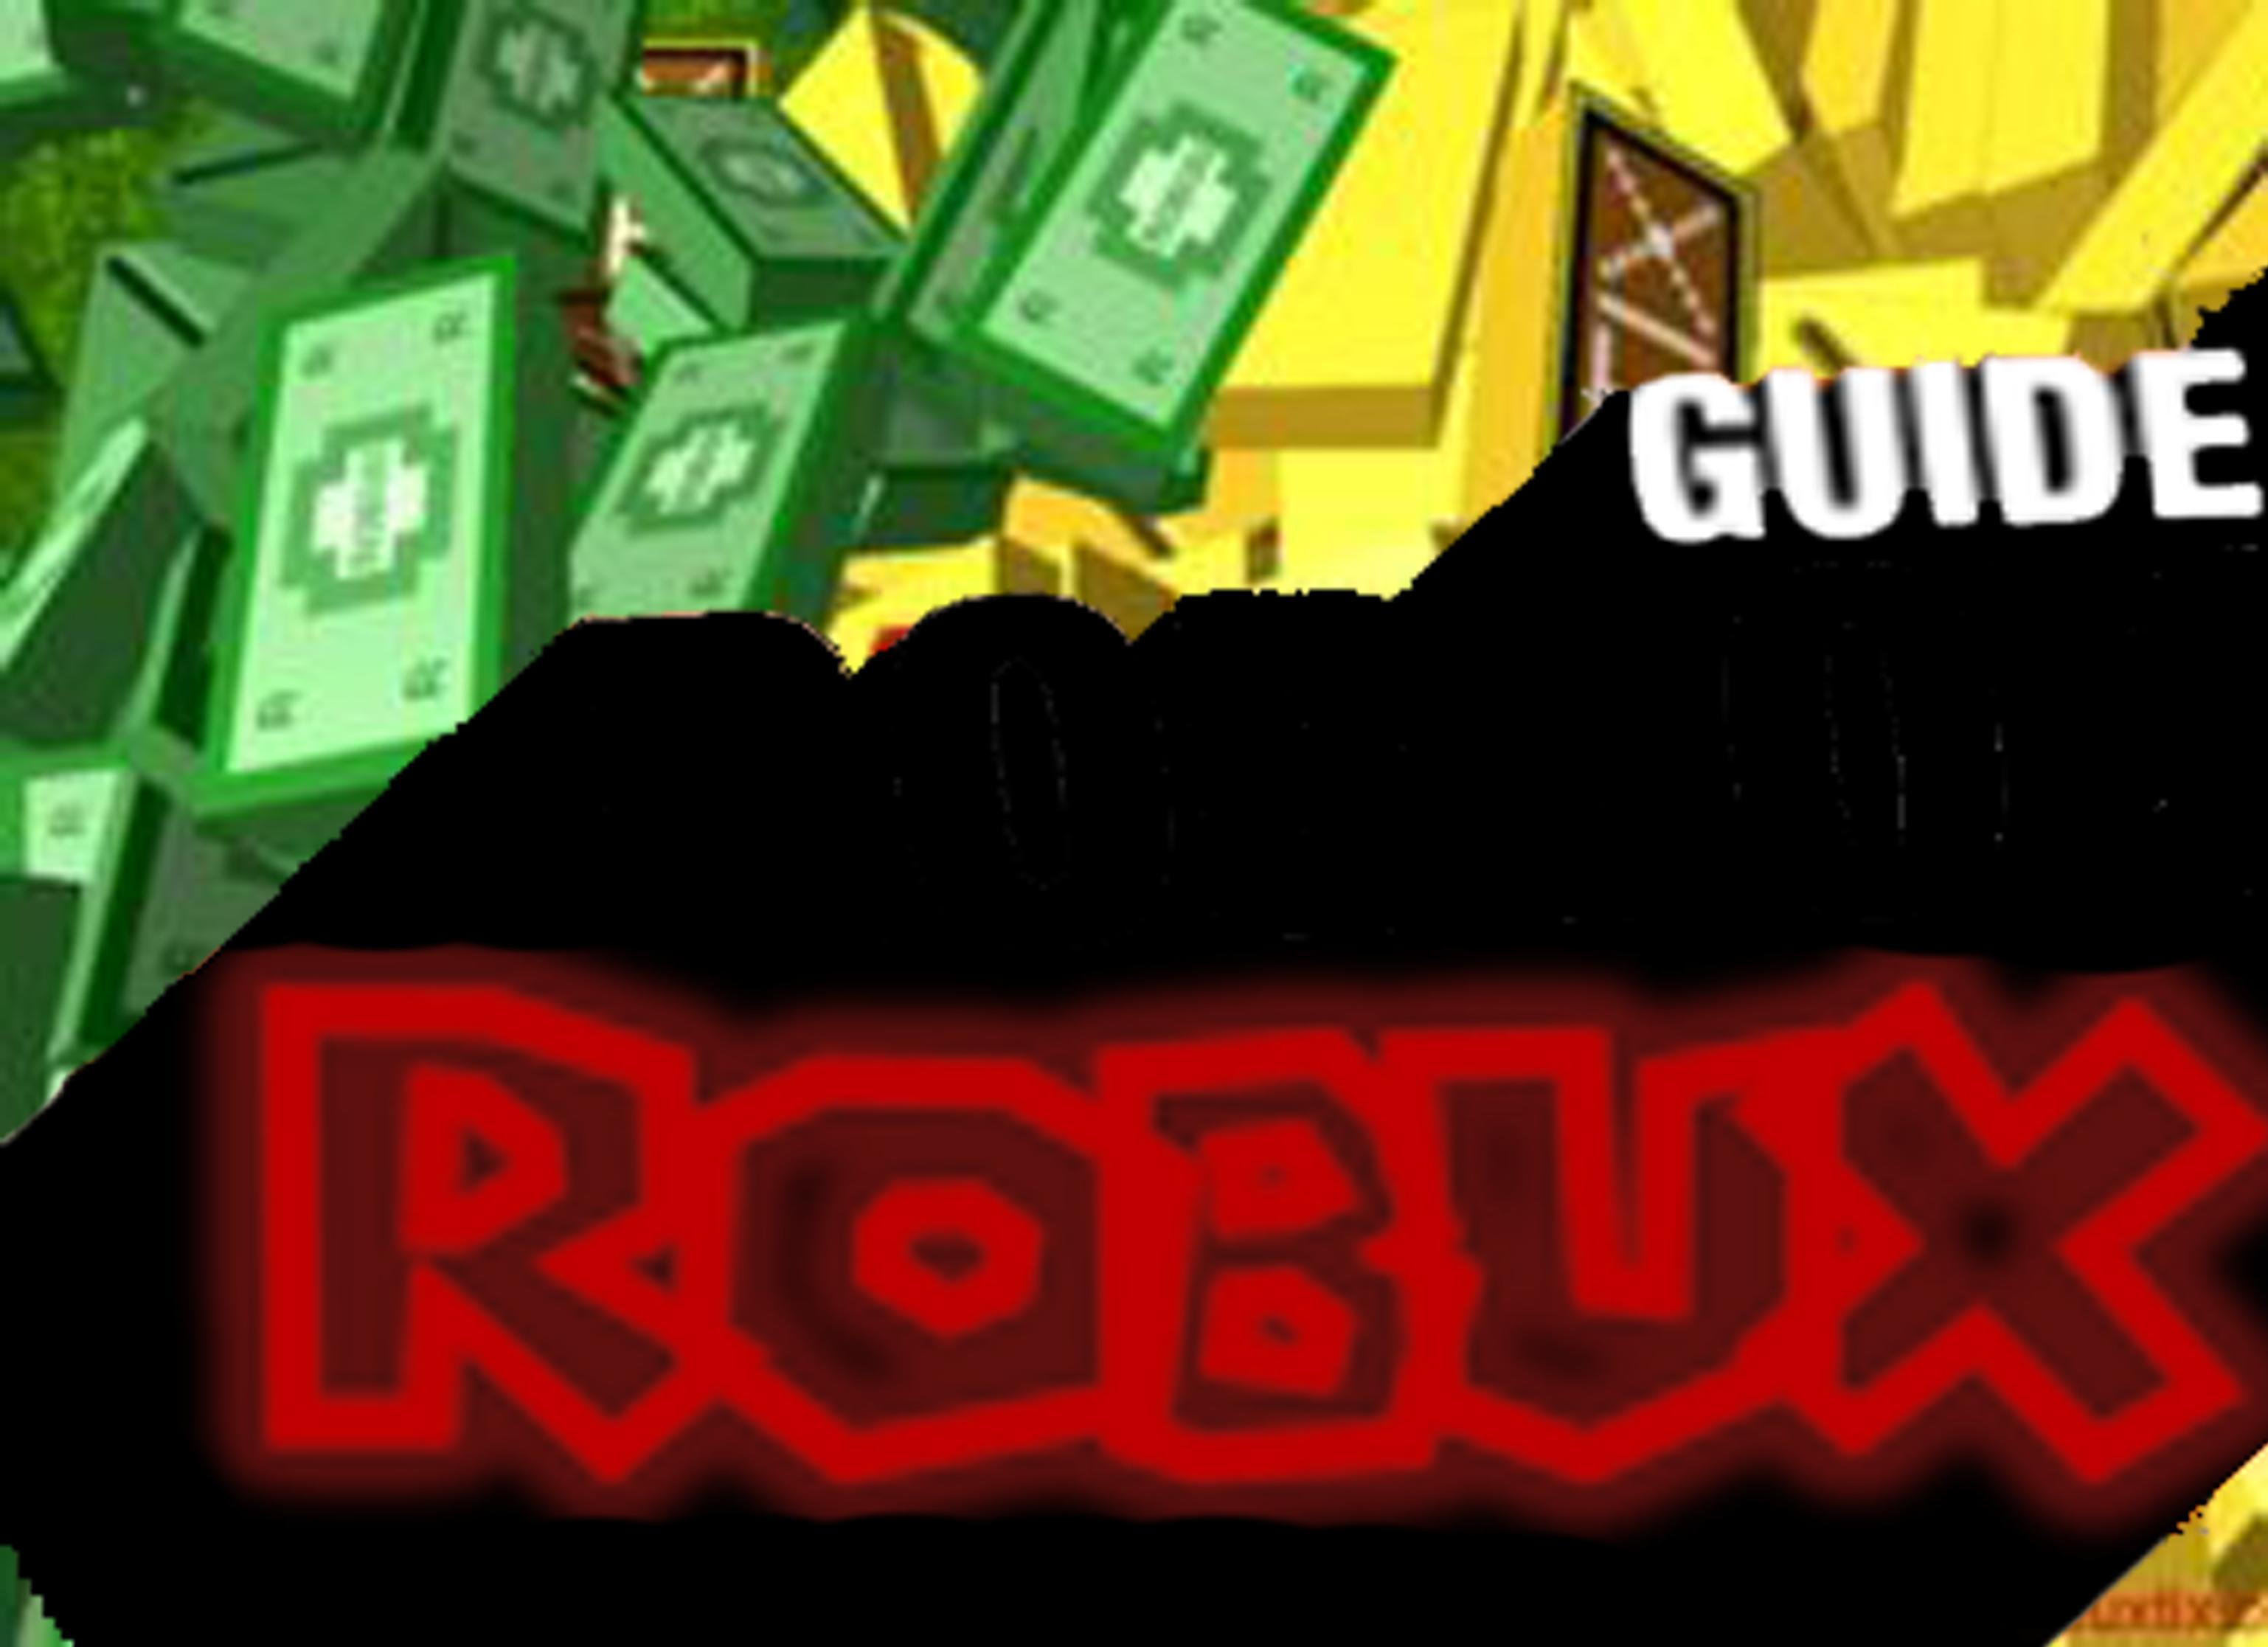 Free Robux For Roblox For Android Apk Download - how to get robux free tips apk 270 download free apk